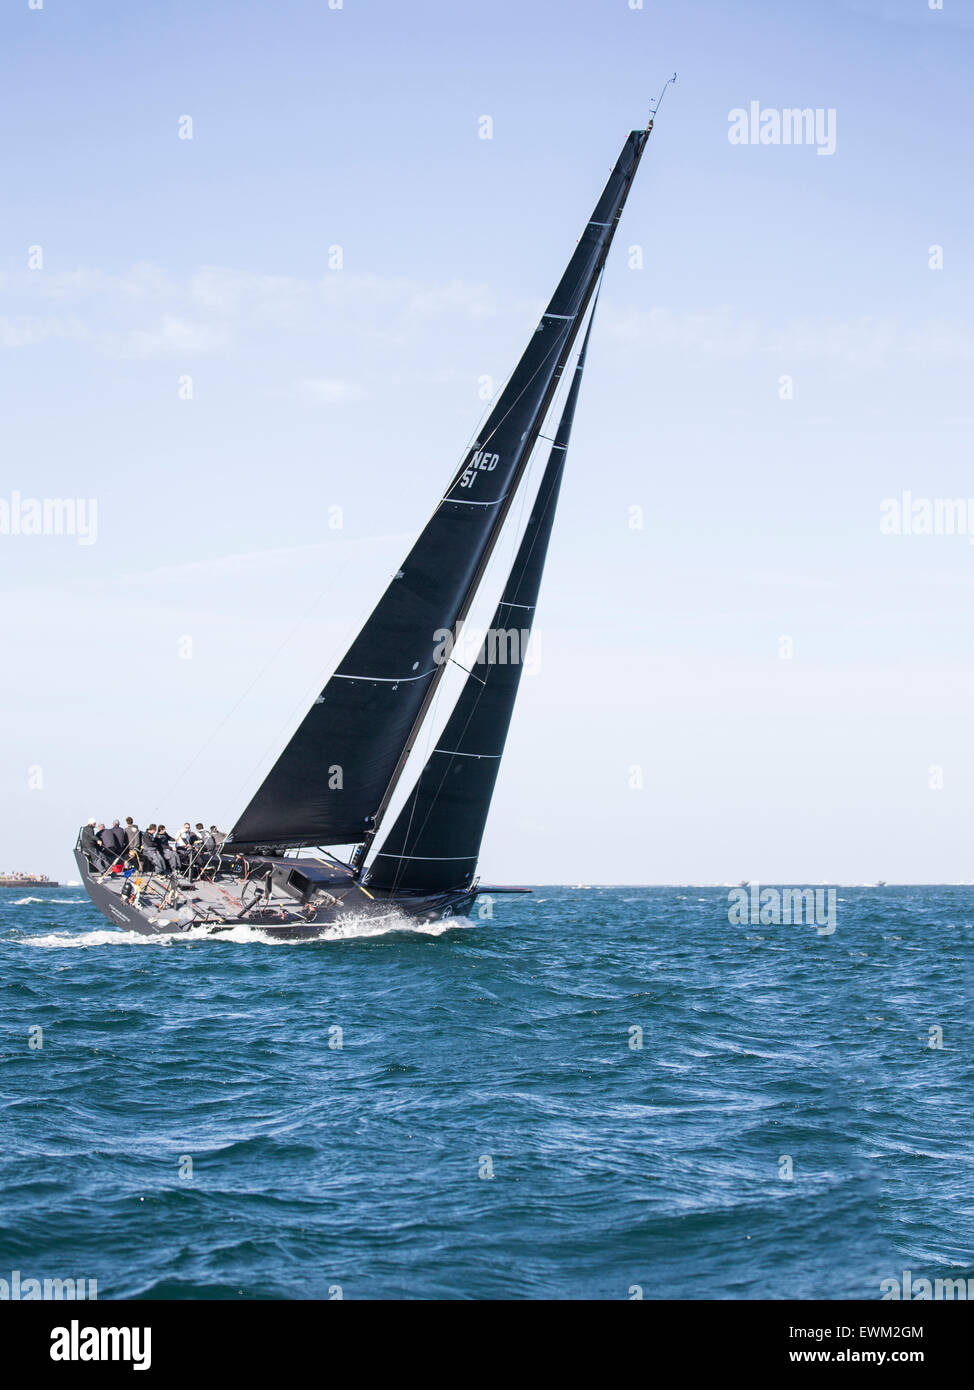 UK. 27th June, 2015. Ker 51 yacht NED51 'Tonnere 4' owned and skippered by Frank Gerber, taking part in the 2015 Round the Island Race Credit:  Niall Ferguson/Alamy Live News Stock Photo